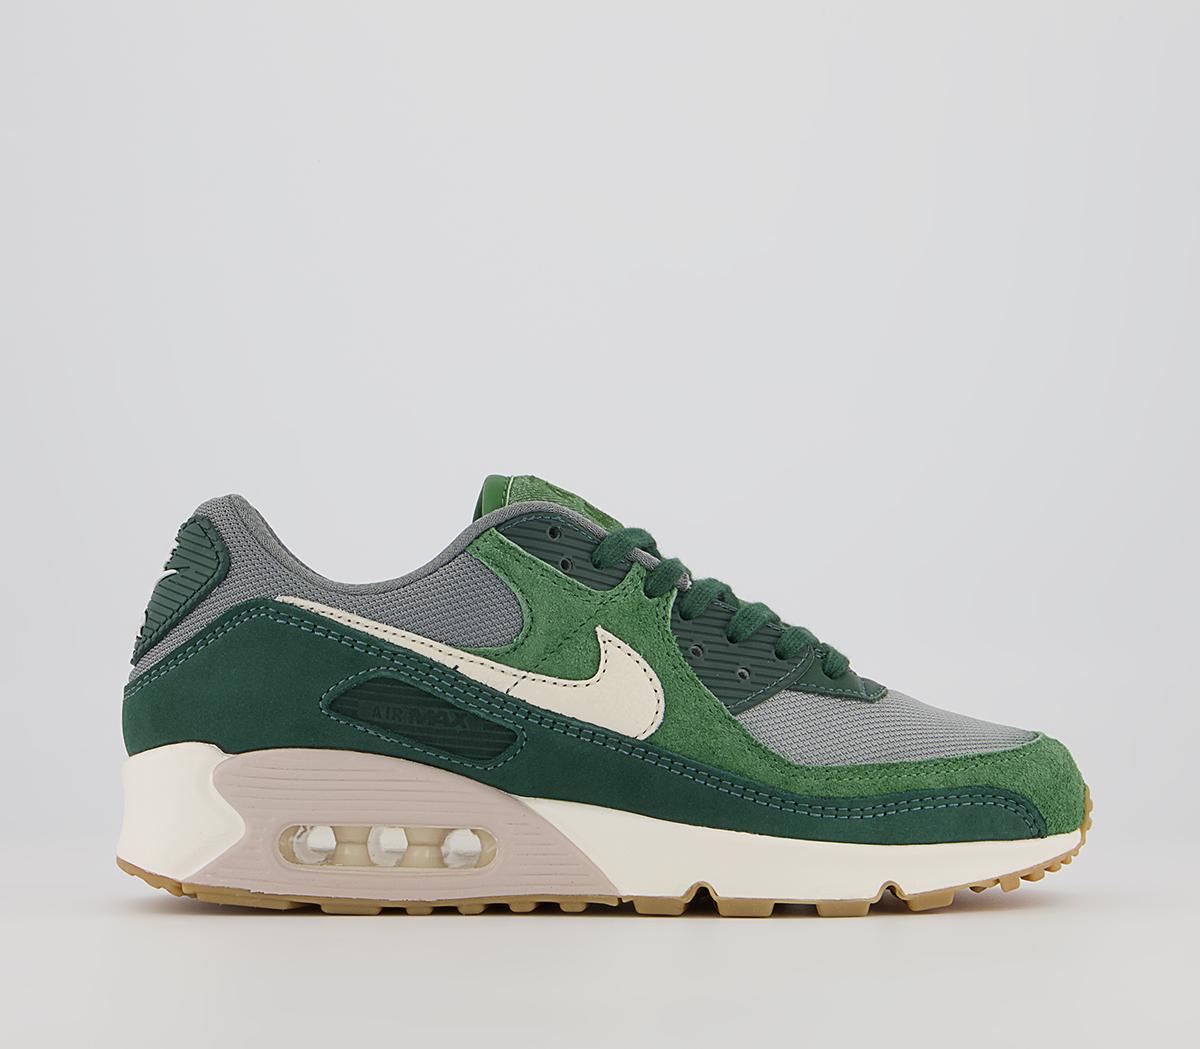 Nike Air Max 90 Trainers Pro Green Ivory Forest Green Grey Parti - Nike Air Max